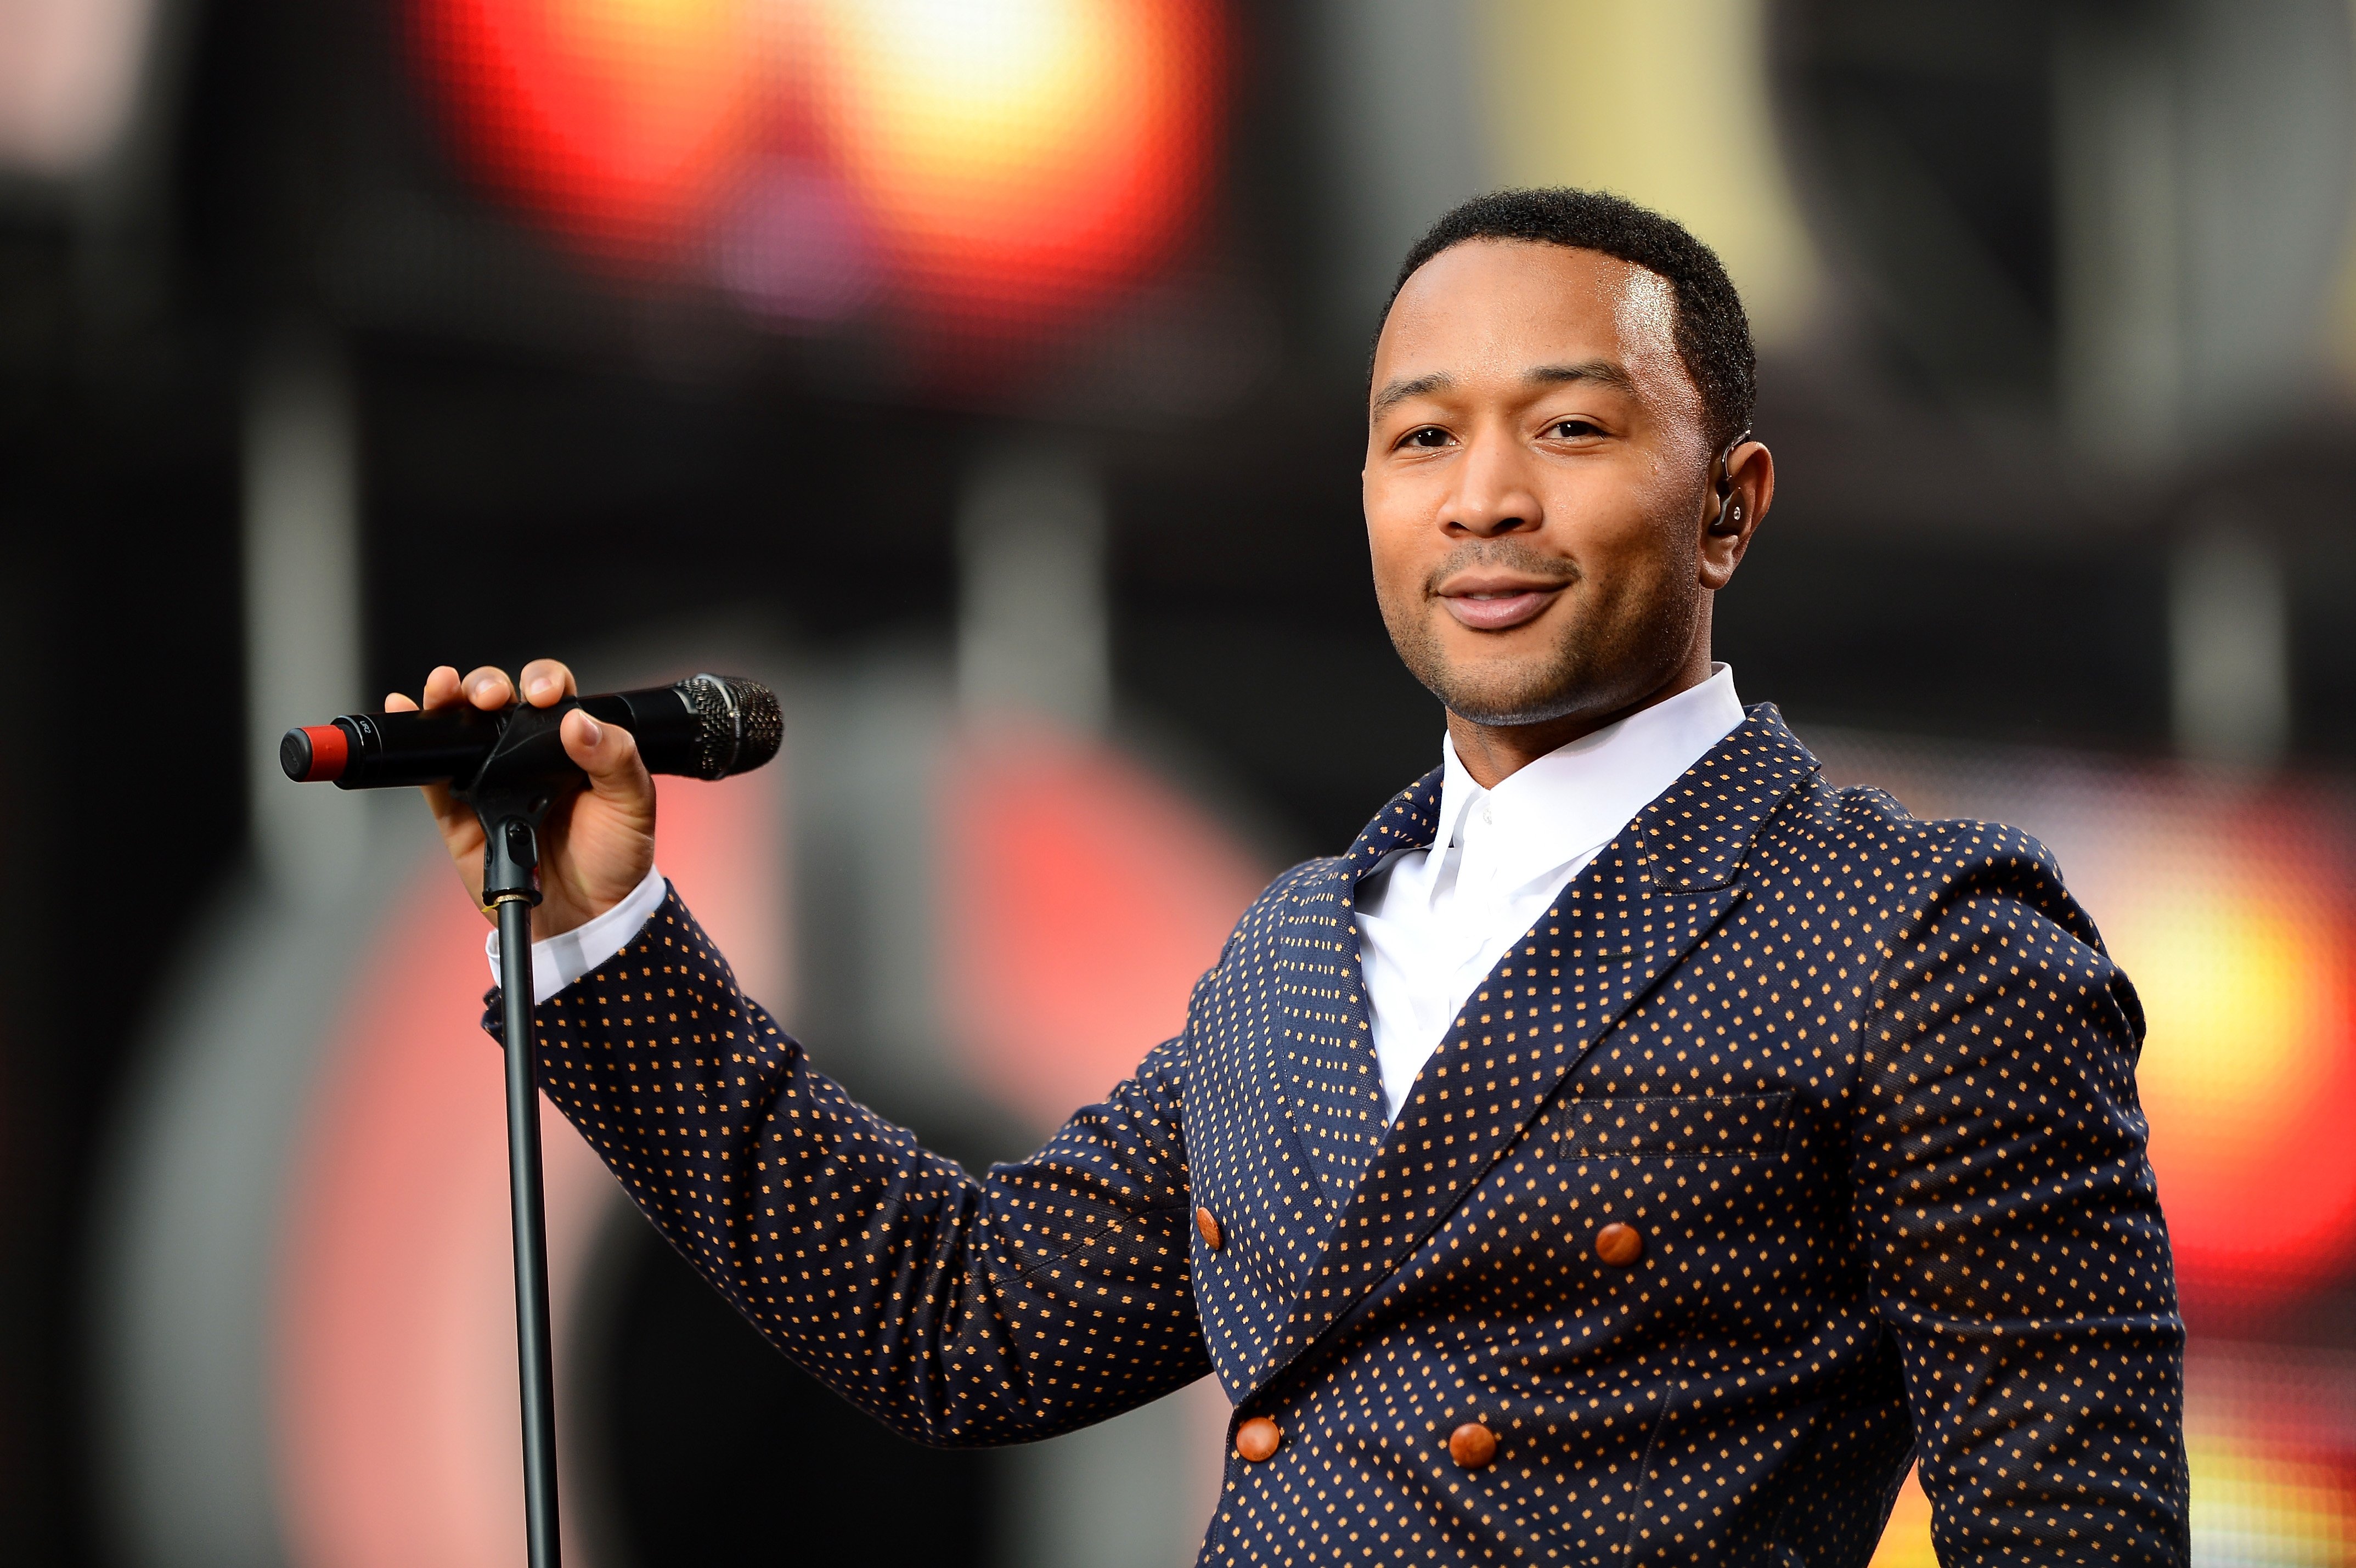 John Legend performs on stage at the "Chime For Change: The Sound Of Change Live" Concert at Twickenham Stadium on June 1, 2013 | Photo: GettyImages